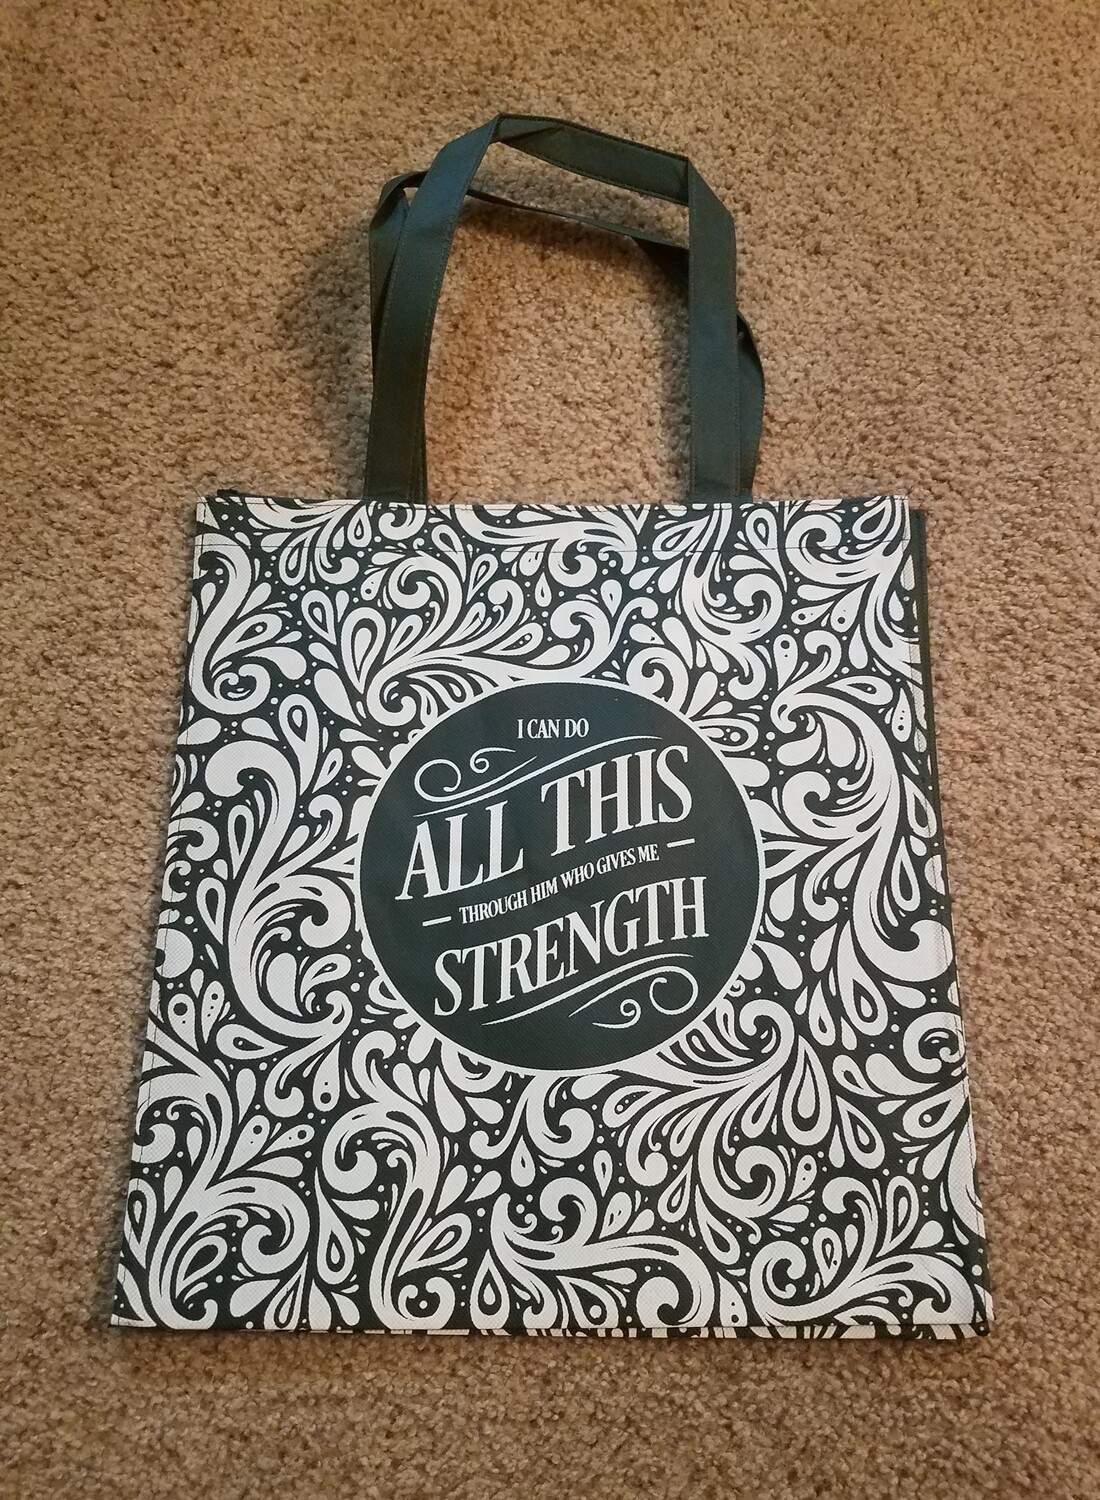 I Can Do All This Through Him Who Gives me Strength Tote Bag